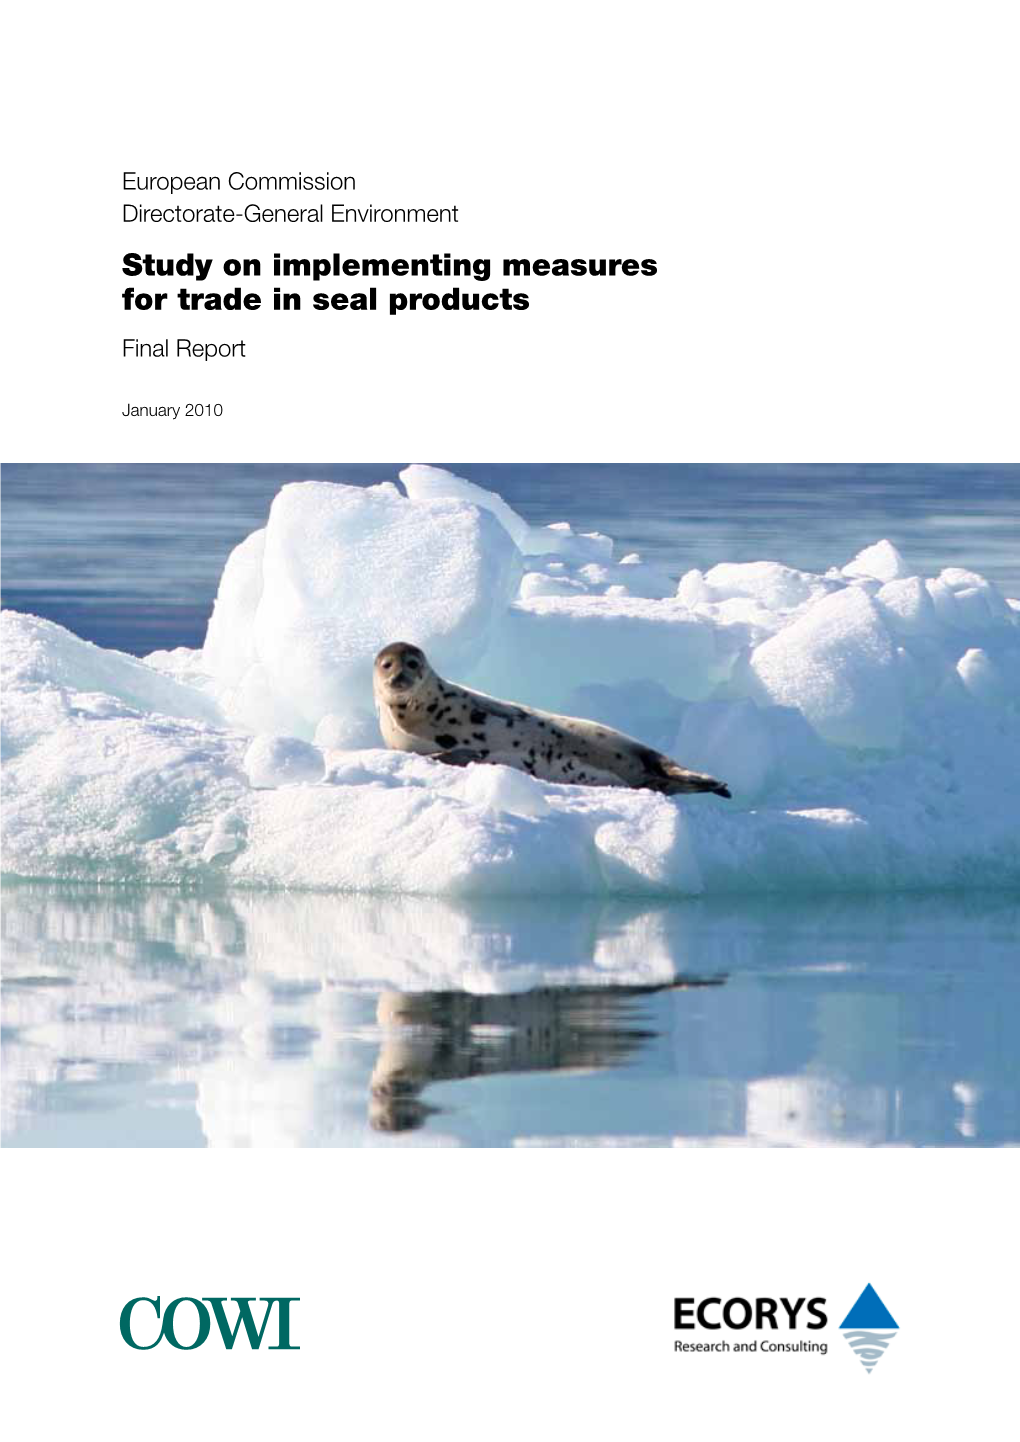 Study on Implementing Measures for Trade in Seal Products Final Report